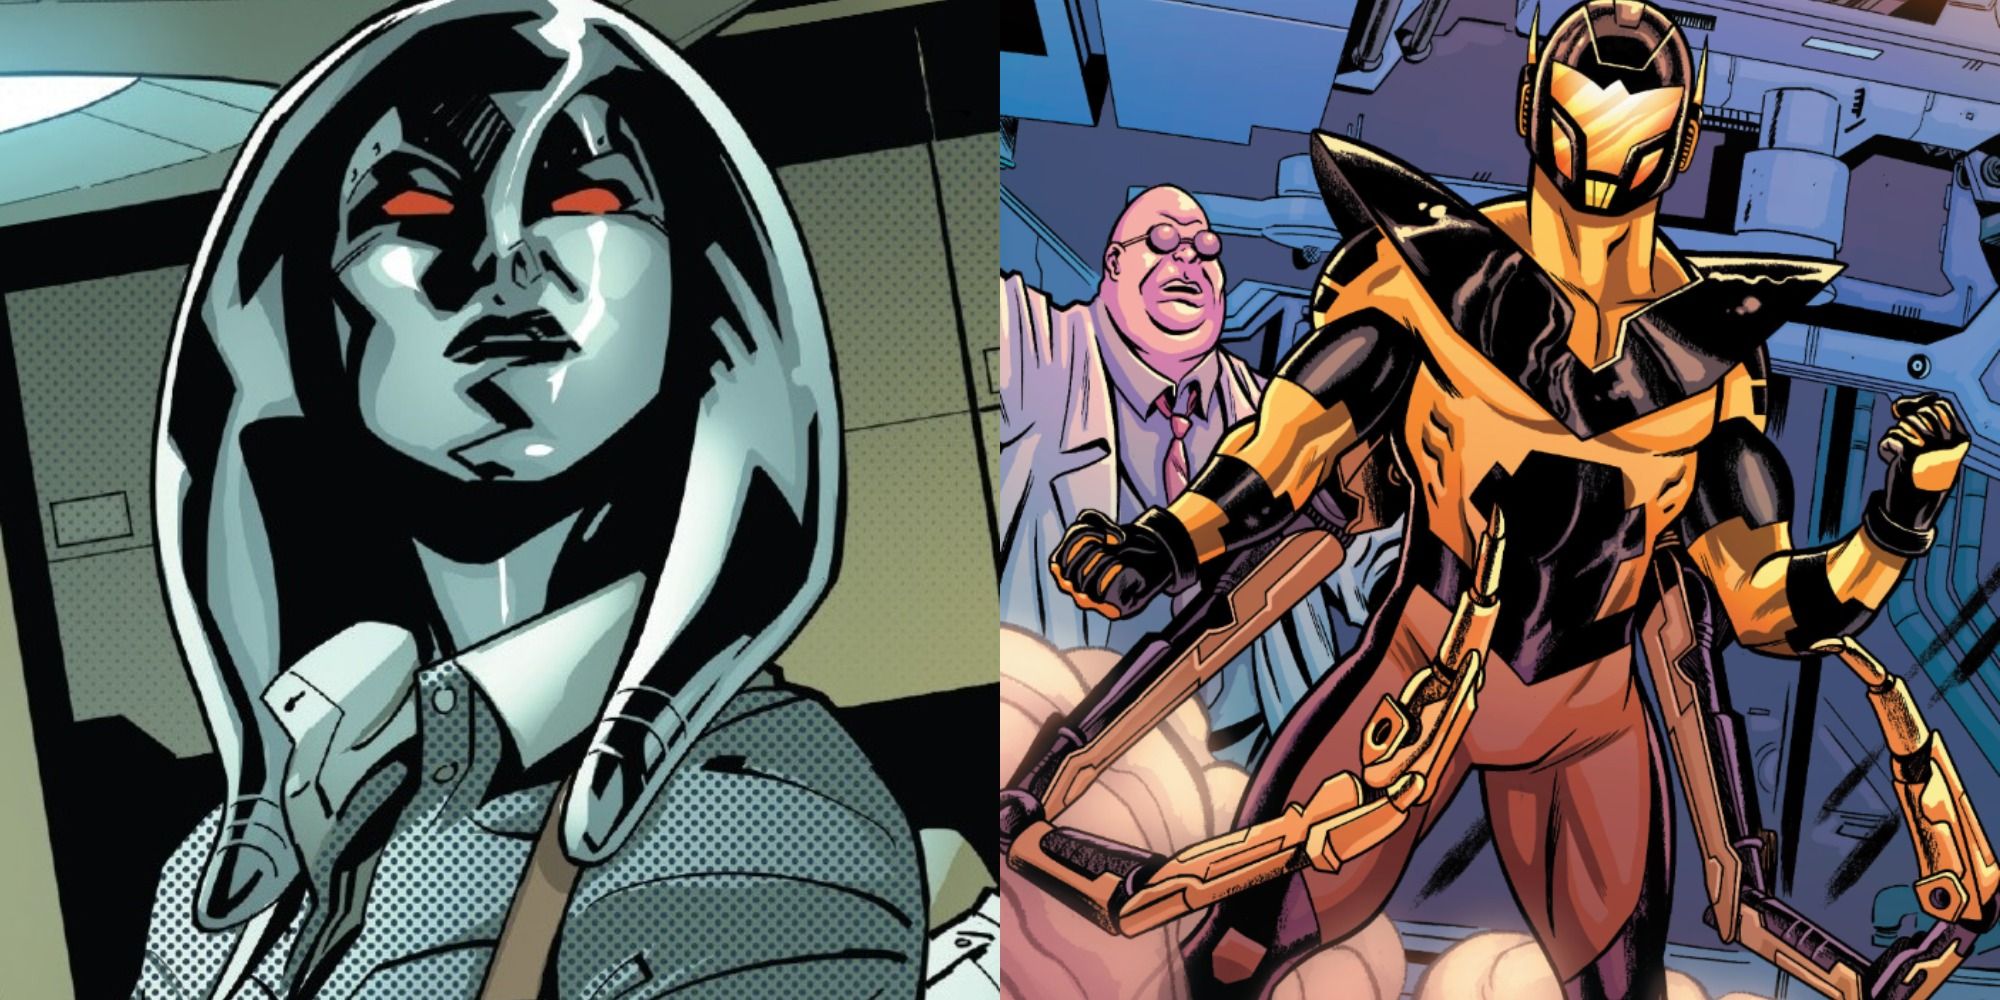 Split image showing Jocasta and Yellowjacket with Eggman behind him